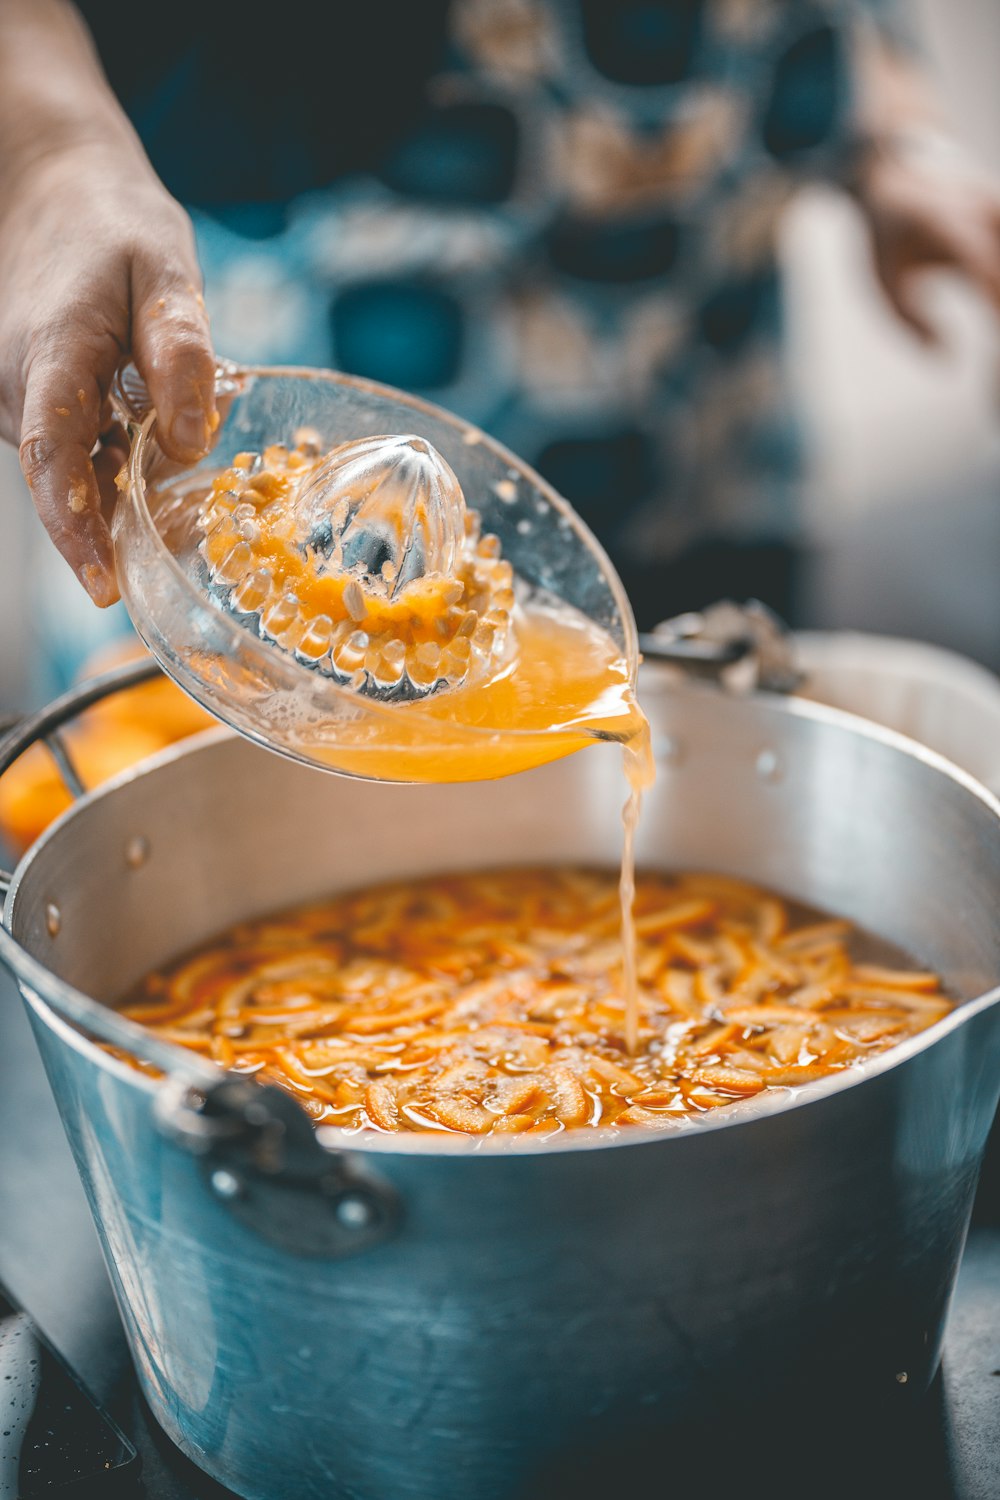 a person pouring something into a pot of food